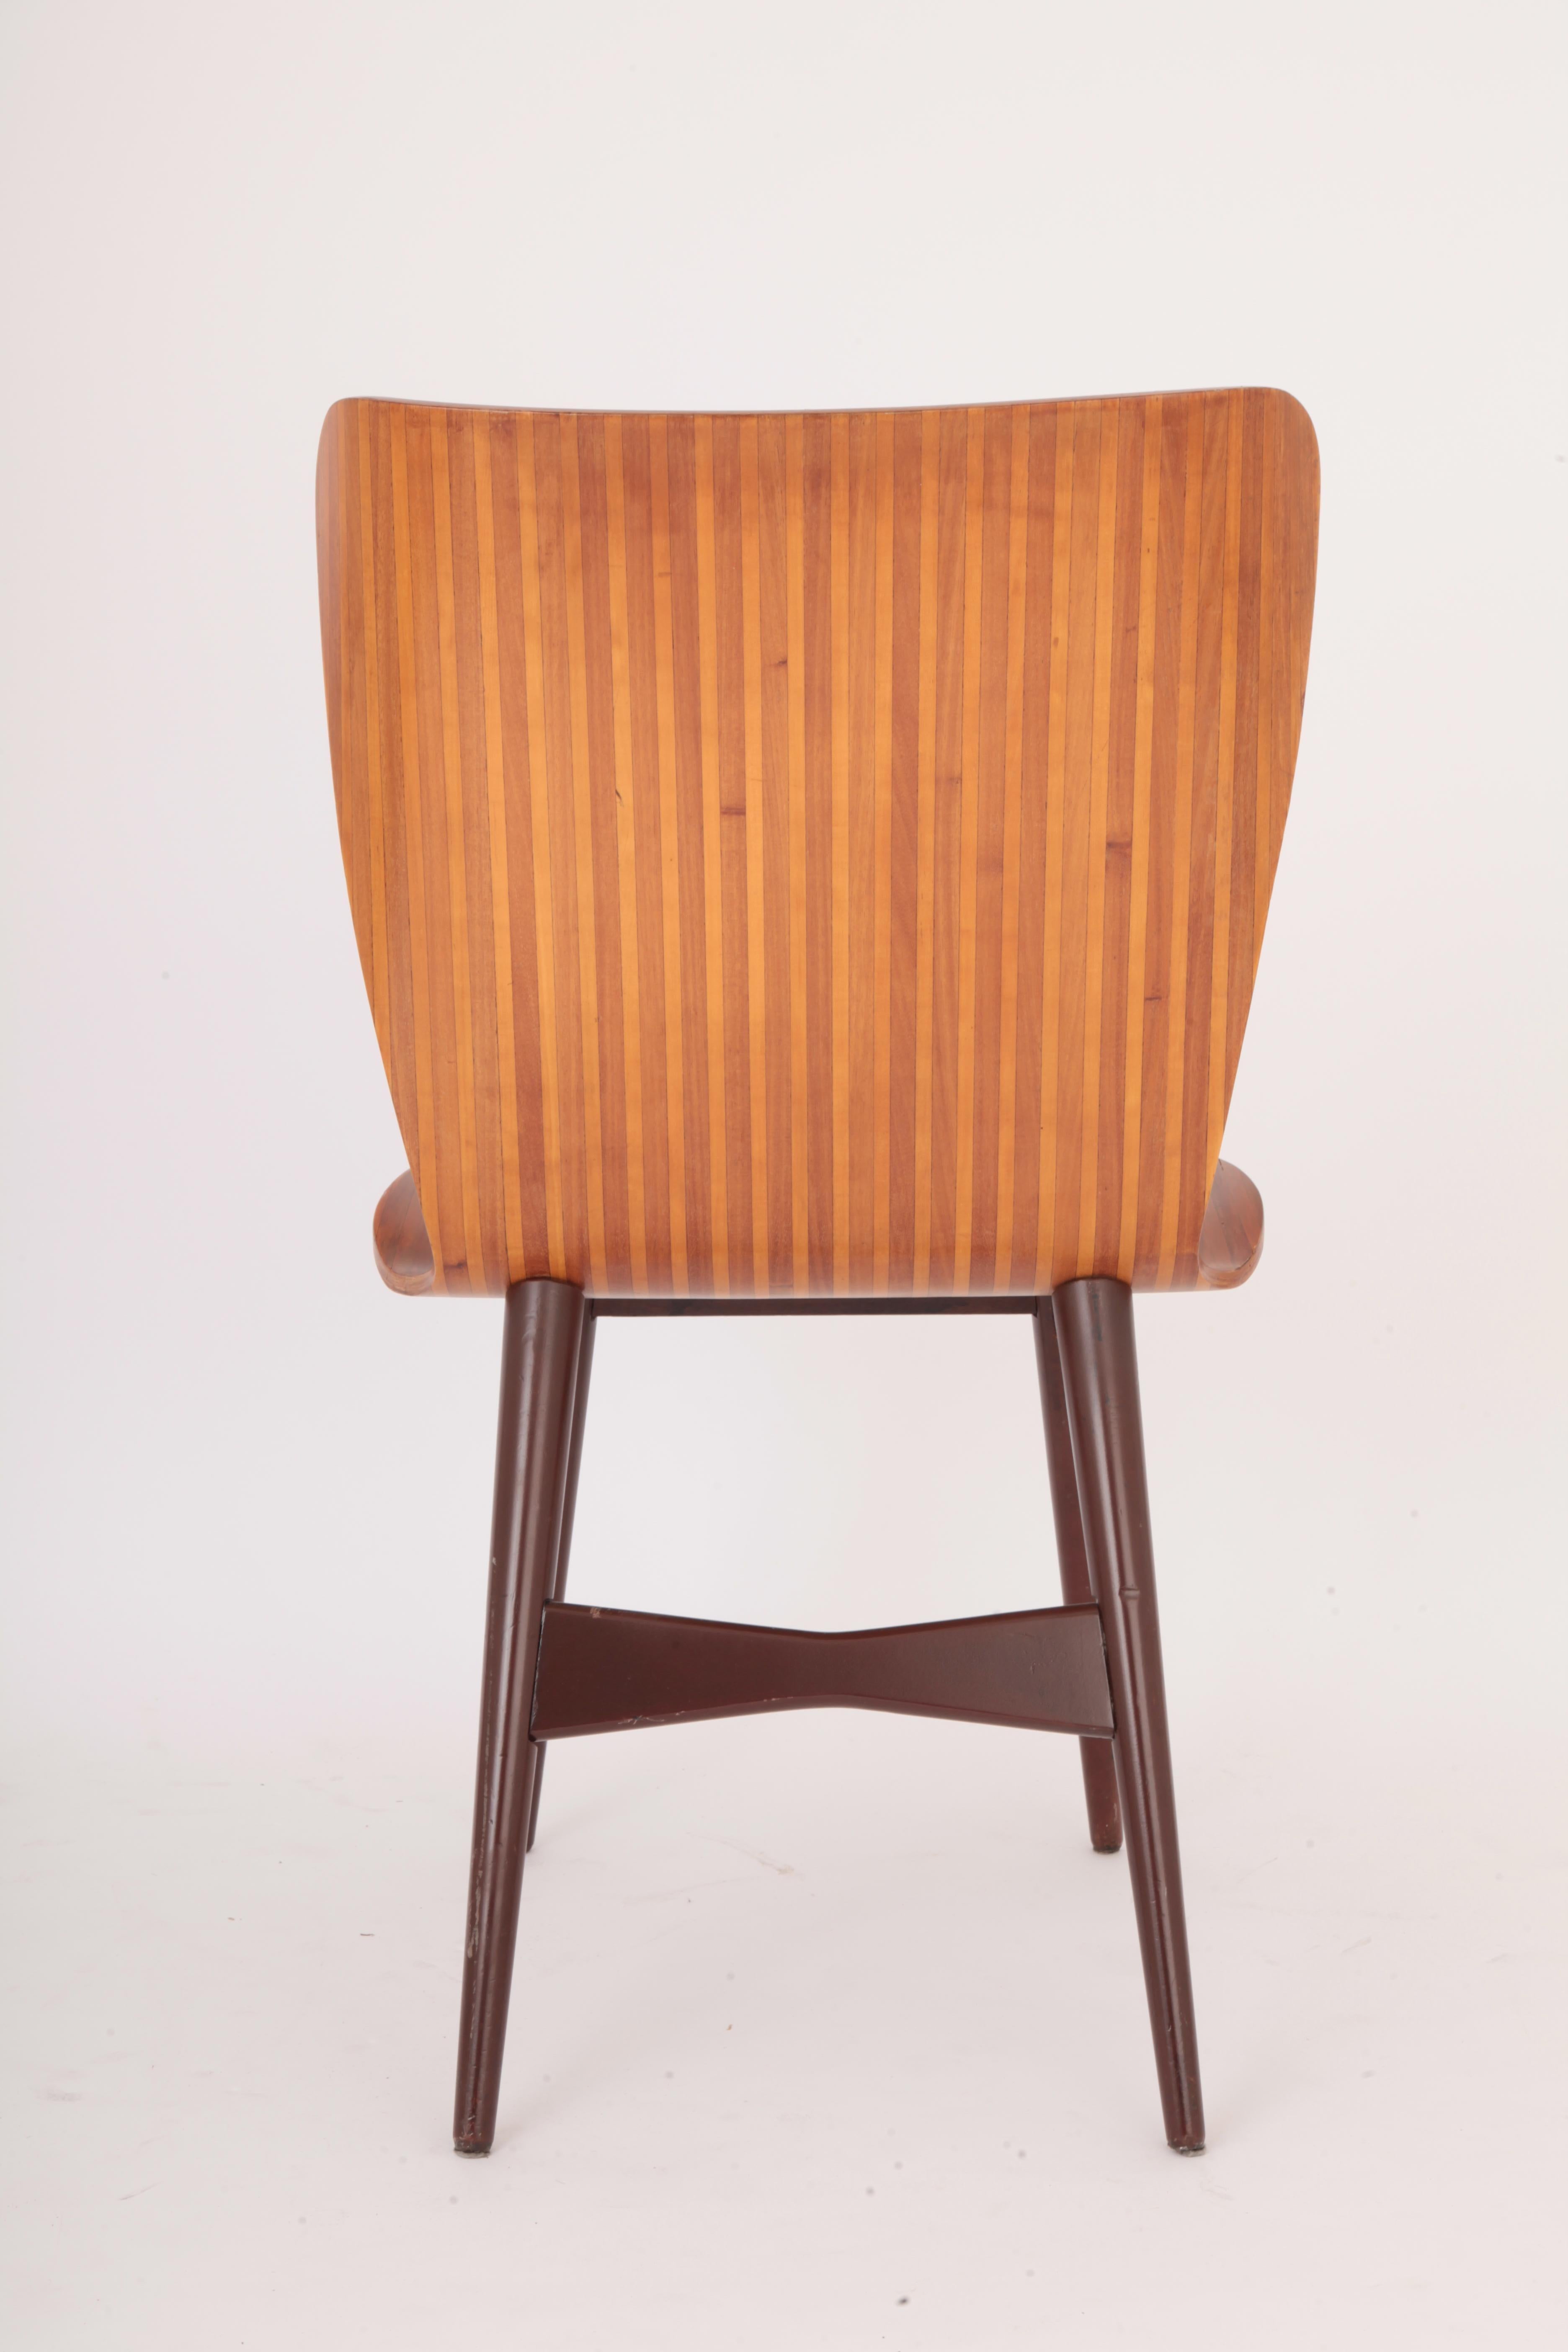 Brazilian Pair of Chairs, Moveis Cimo, Brazil, 1960 For Sale